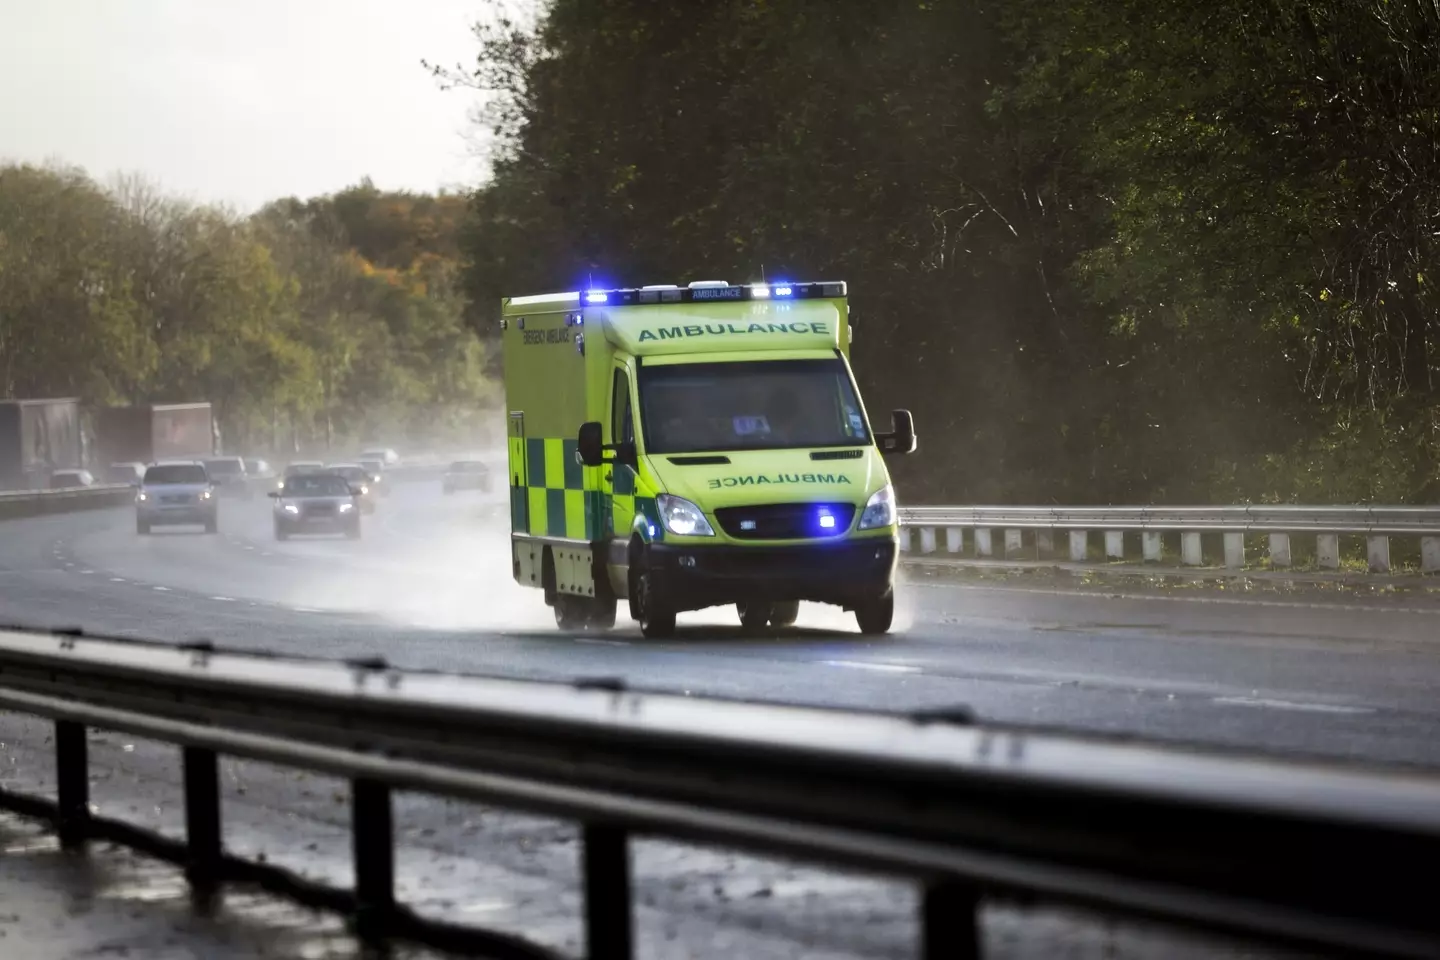 Ambulance waiting times in the UK are missing their targets.